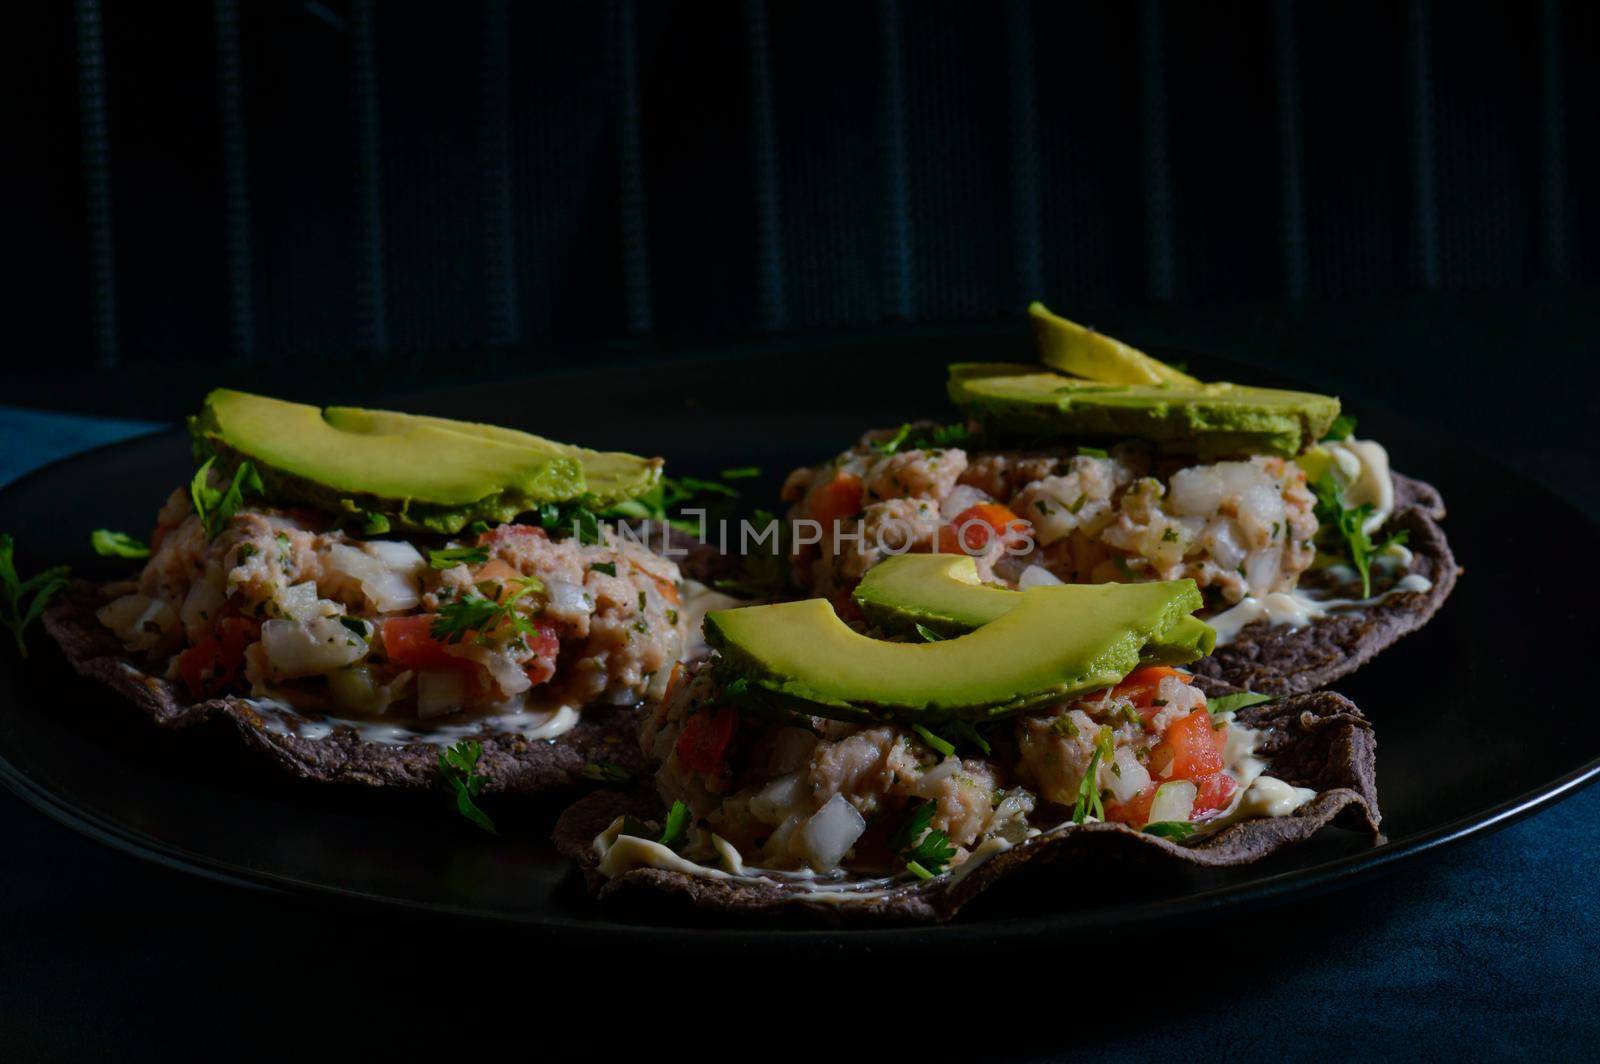 Fish Ceviche on Blue Corn Tostadas, Mexican Food by RobertPB